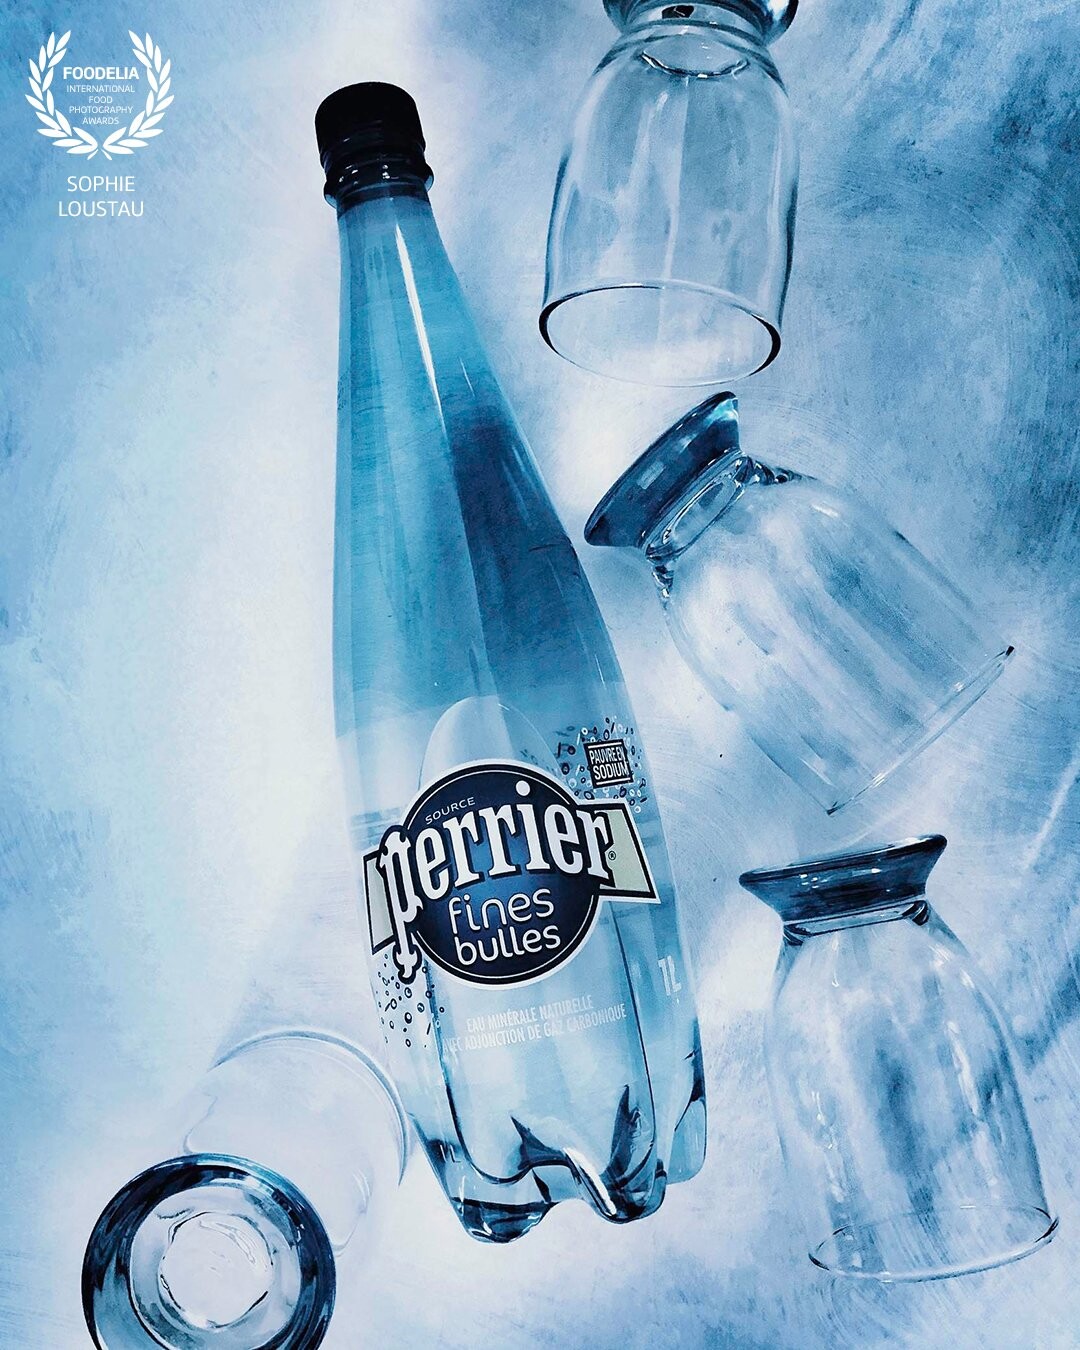 "The fine bubbles". Sparkling drink from Perrier. An inspiration with cold colors to push the idea of refreshment.<br />
Shooting in daylight.